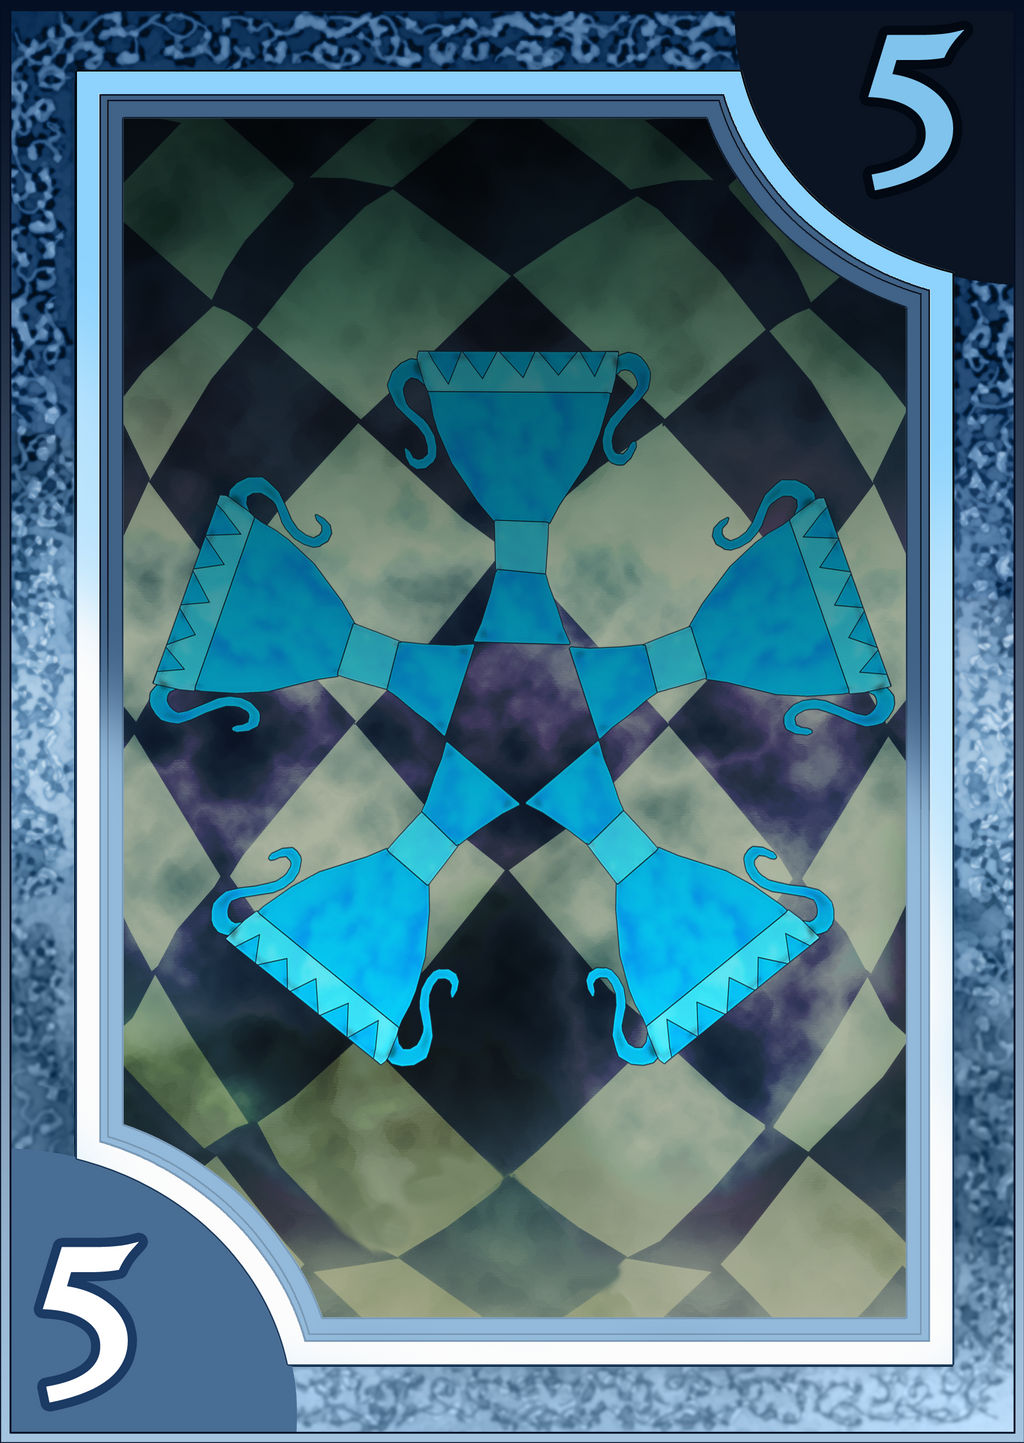 Persona 3/4 Tarot Card Deck HR - Suit of Cups 5 by Enetirnel on DeviantArt